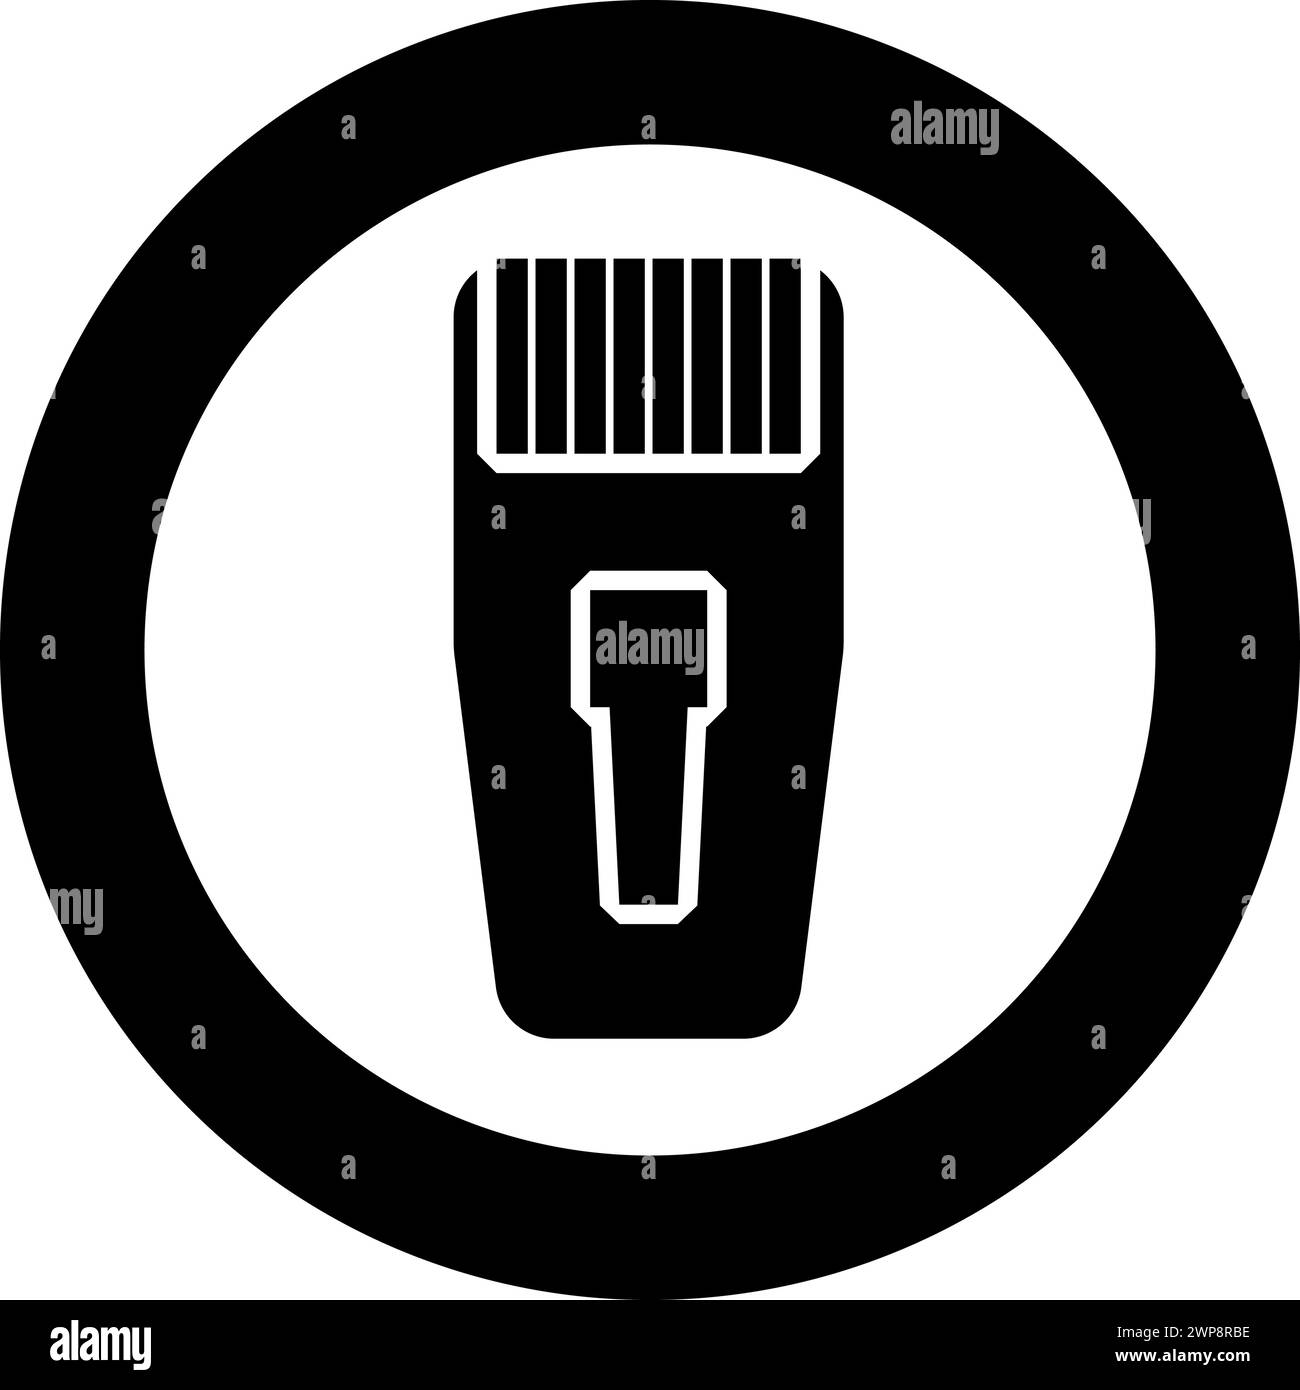 Connector RJ-45 connecter ethernet rj45 internet icon in circle round black color vector illustration image solid outline style simple Stock Vector